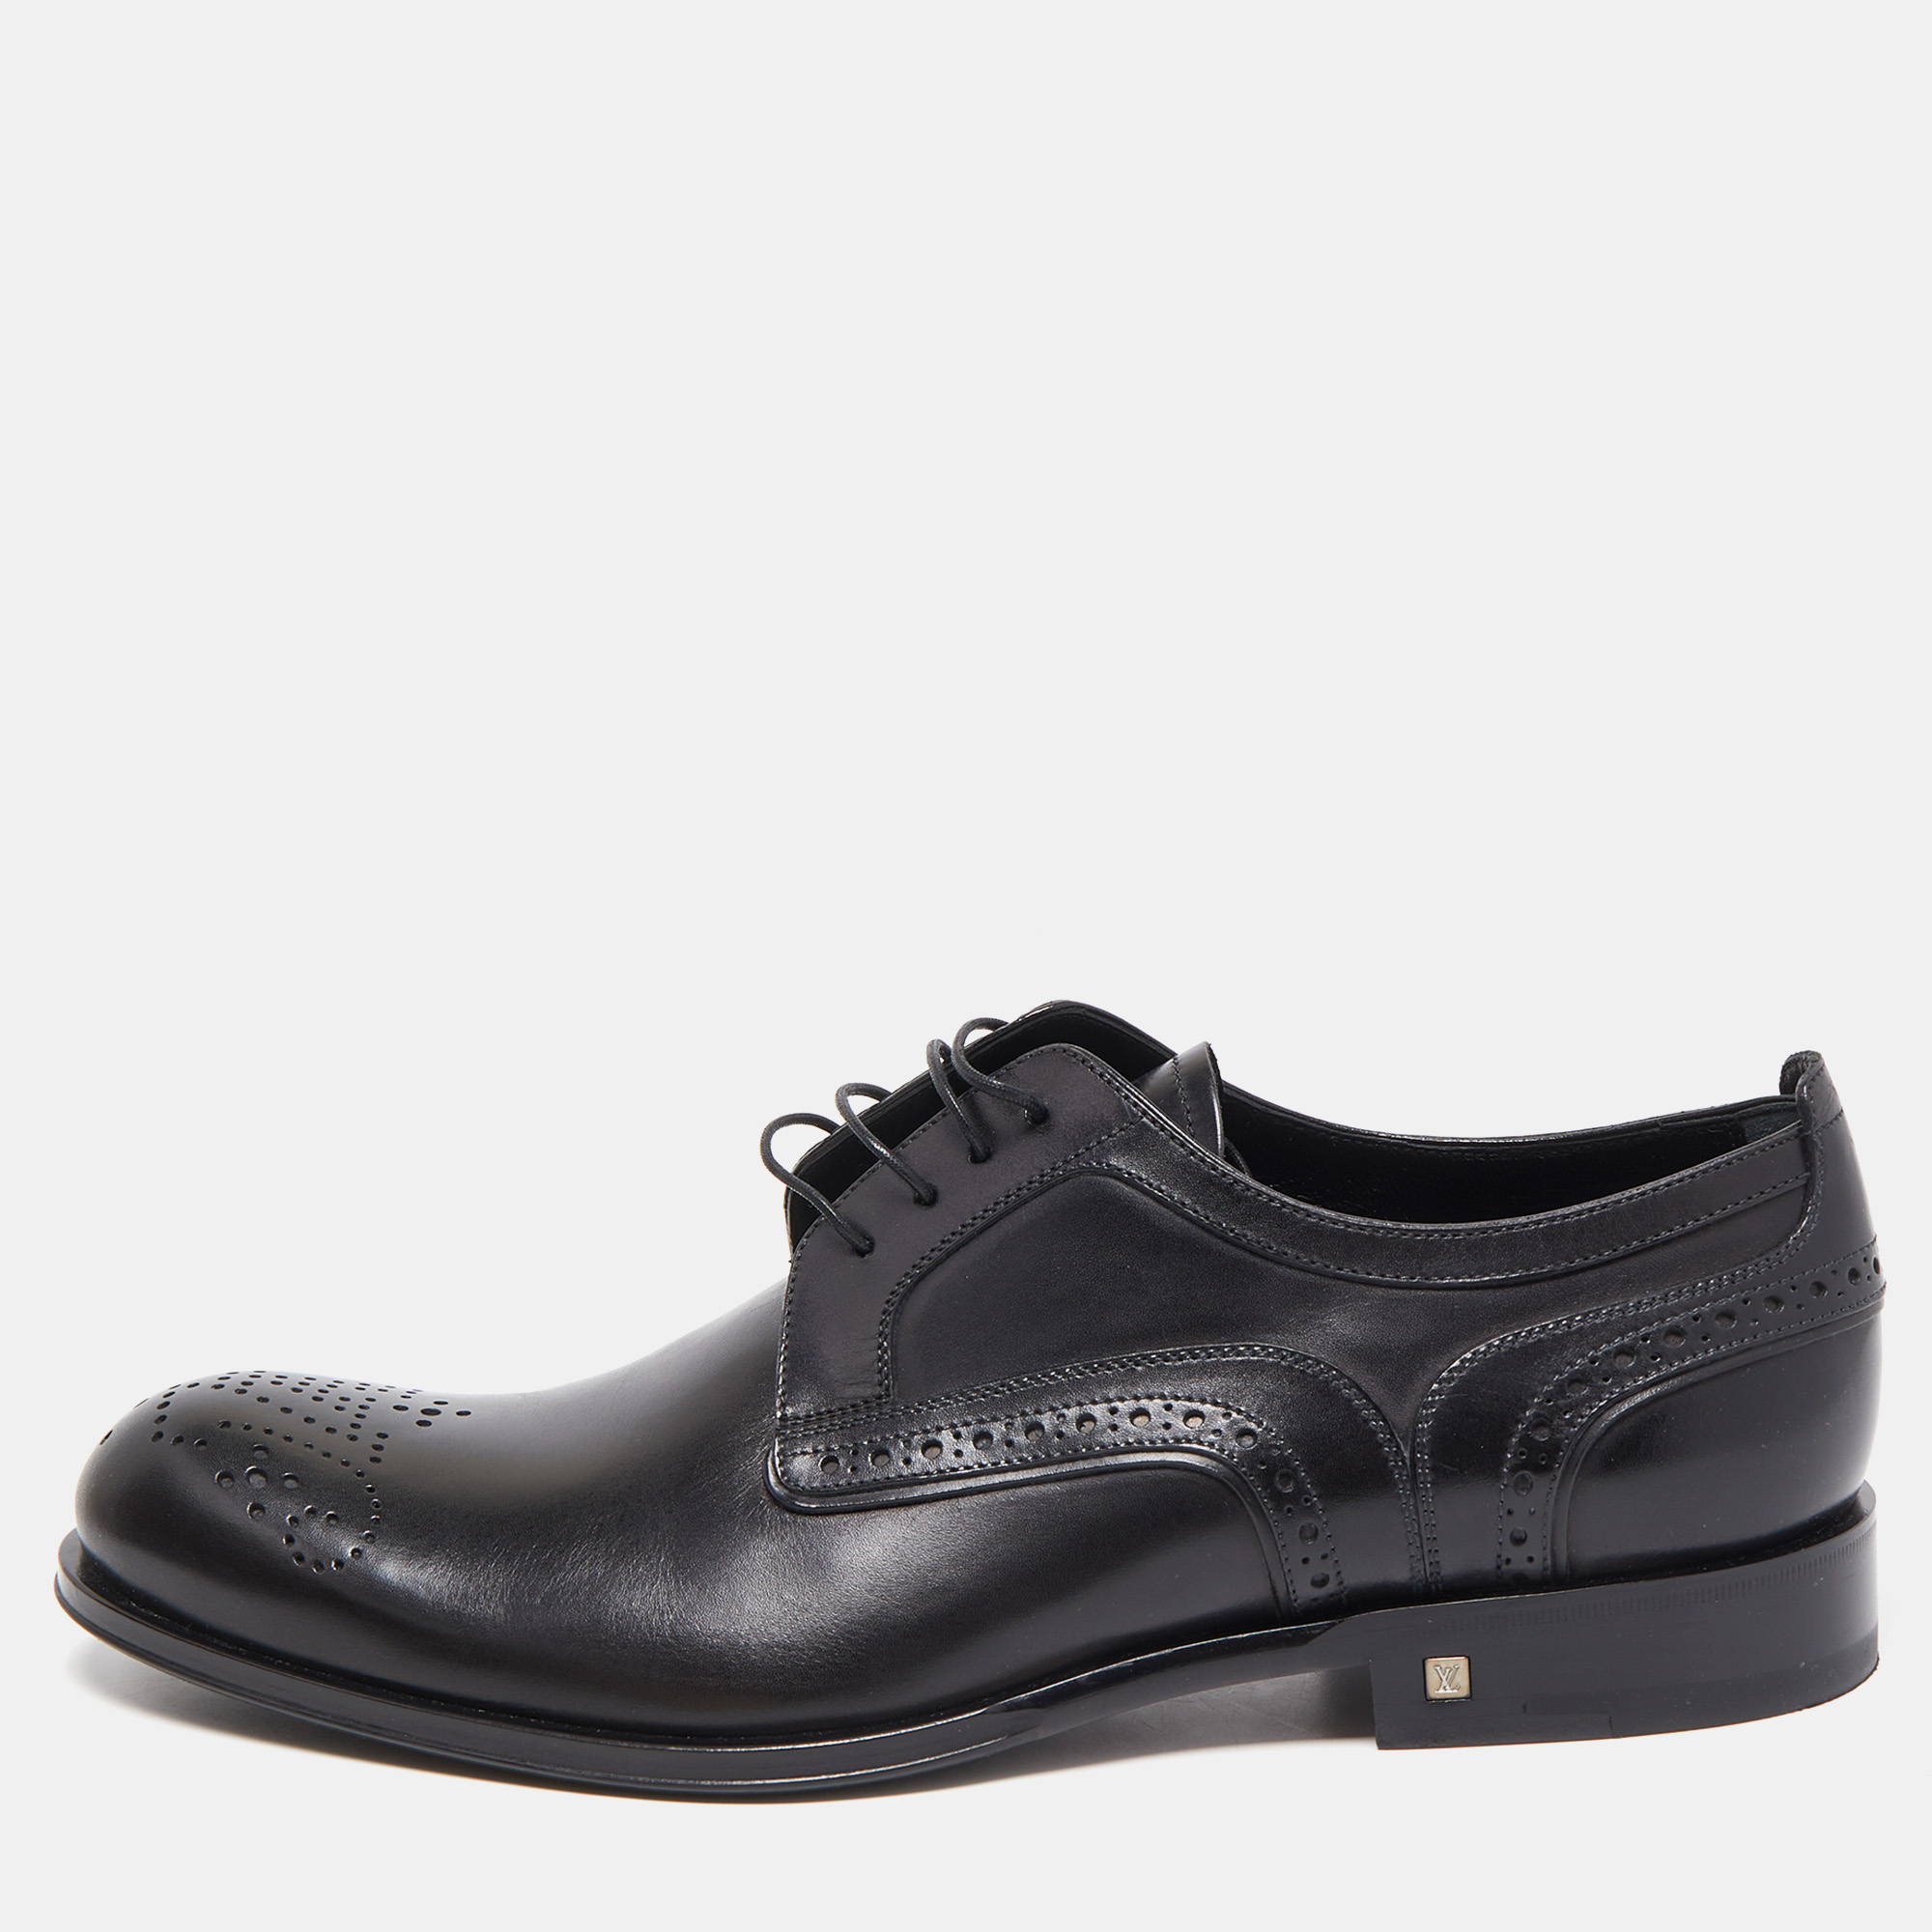 Pre-owned Louis Vuitton Black Brogue Leather Lace Up Oxfords Size 41